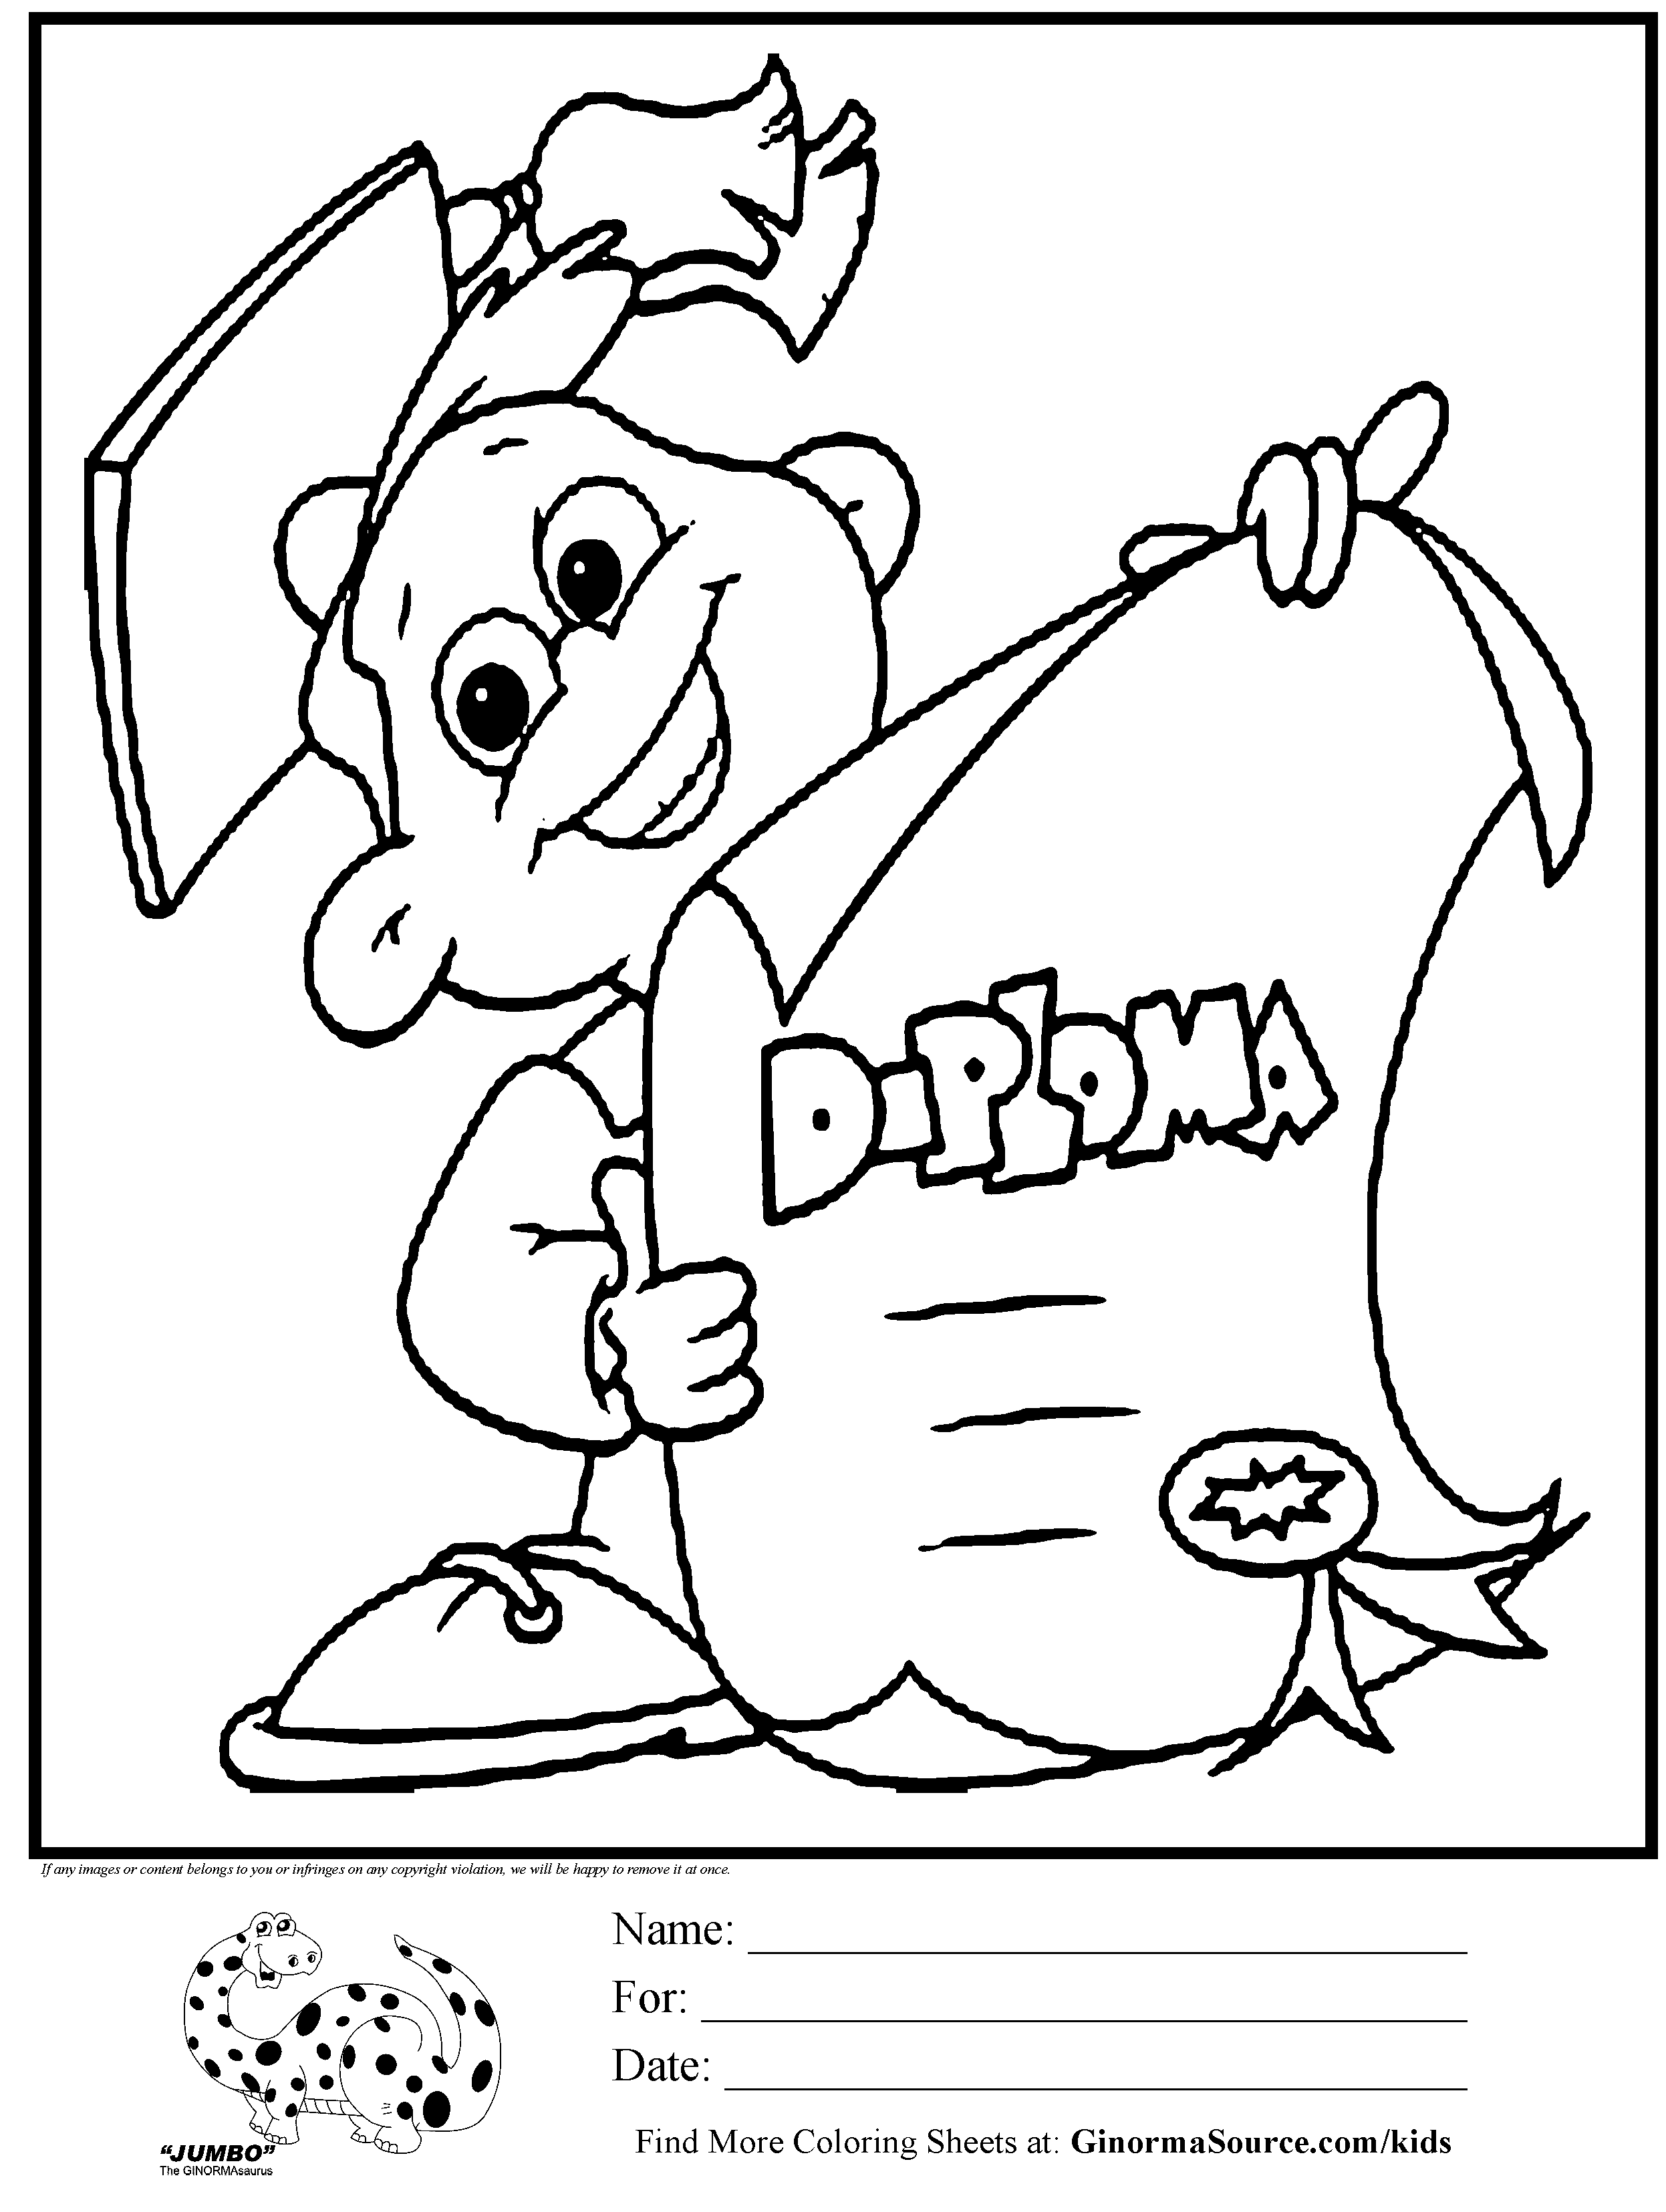 12 Pics of Graduated College Certificate Coloring Pages ...